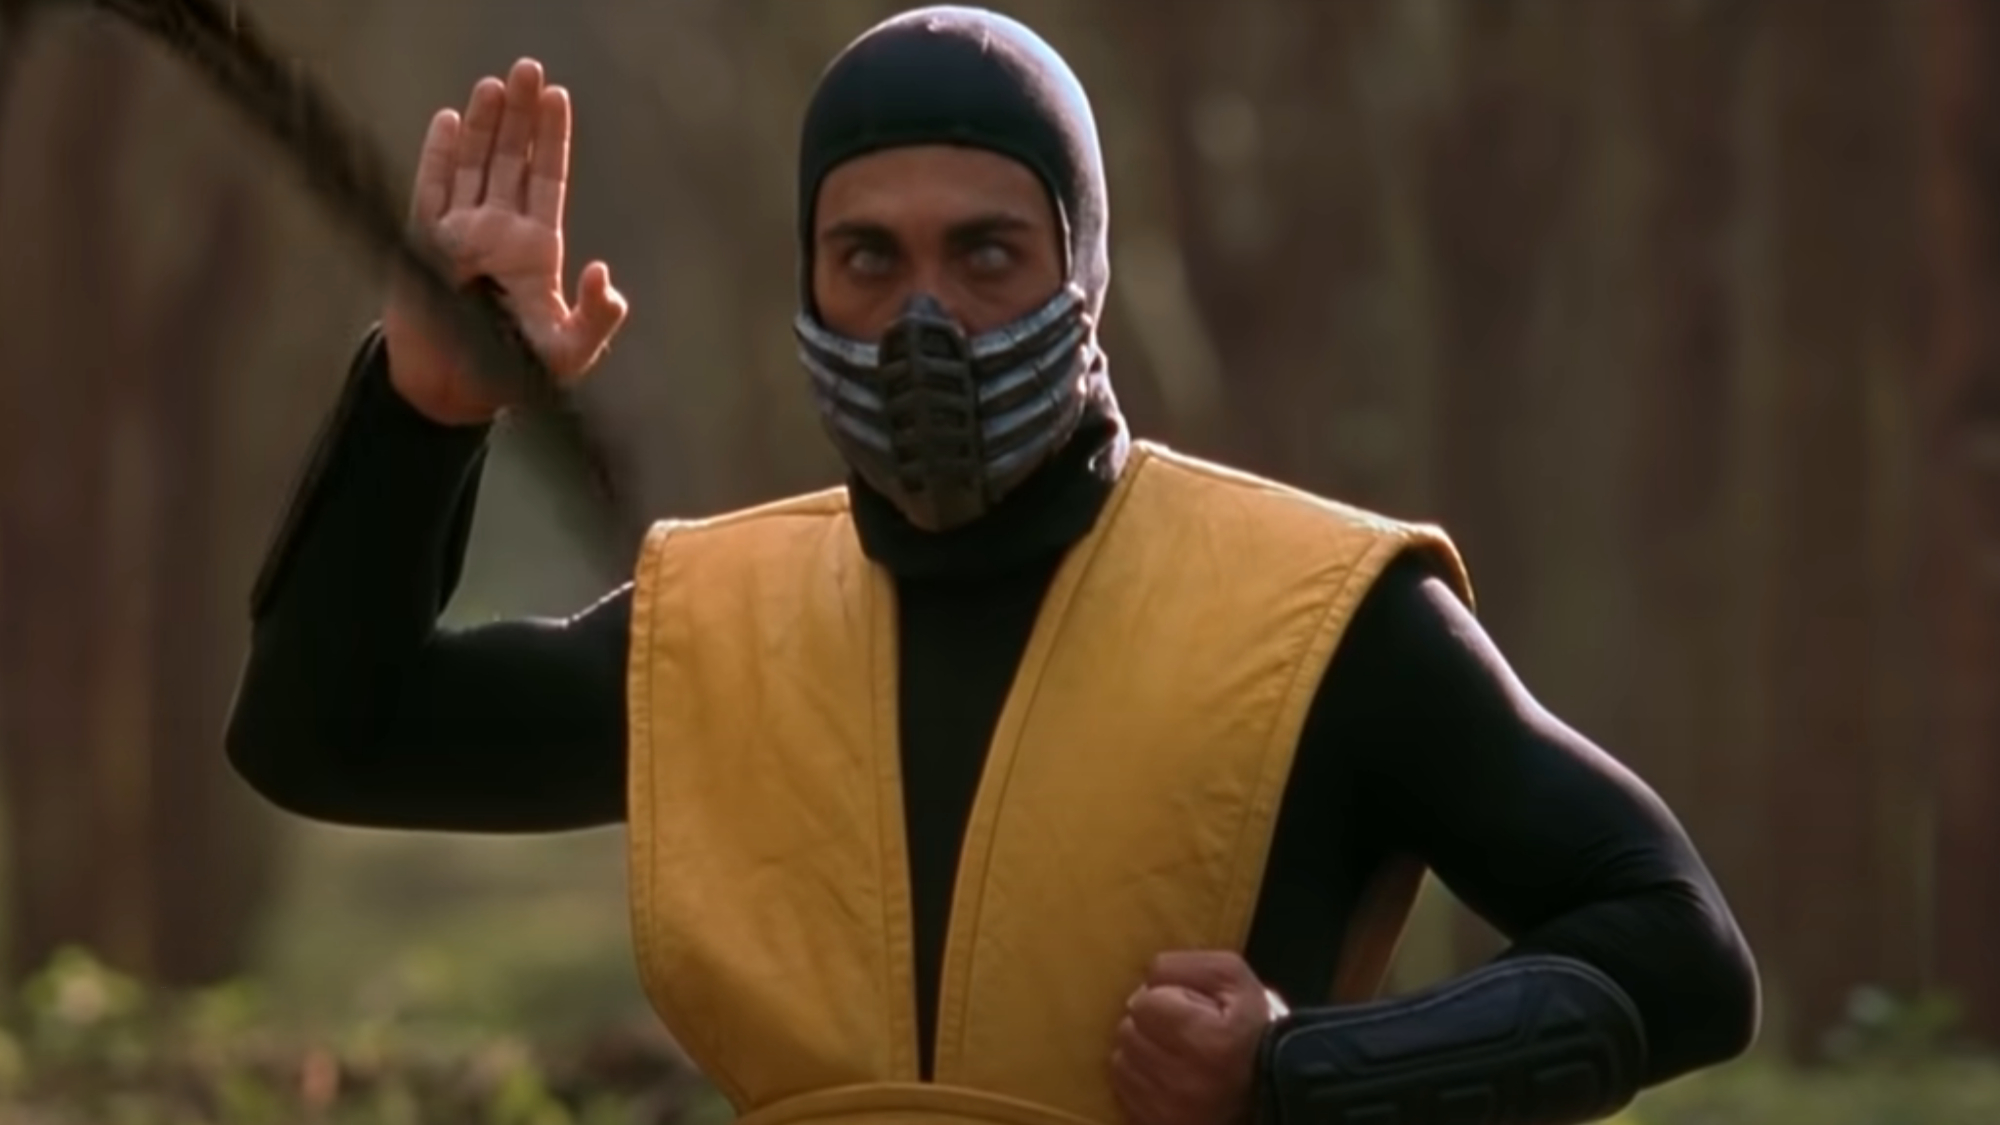 Scorpion absolutely slaying in his yellow vest.